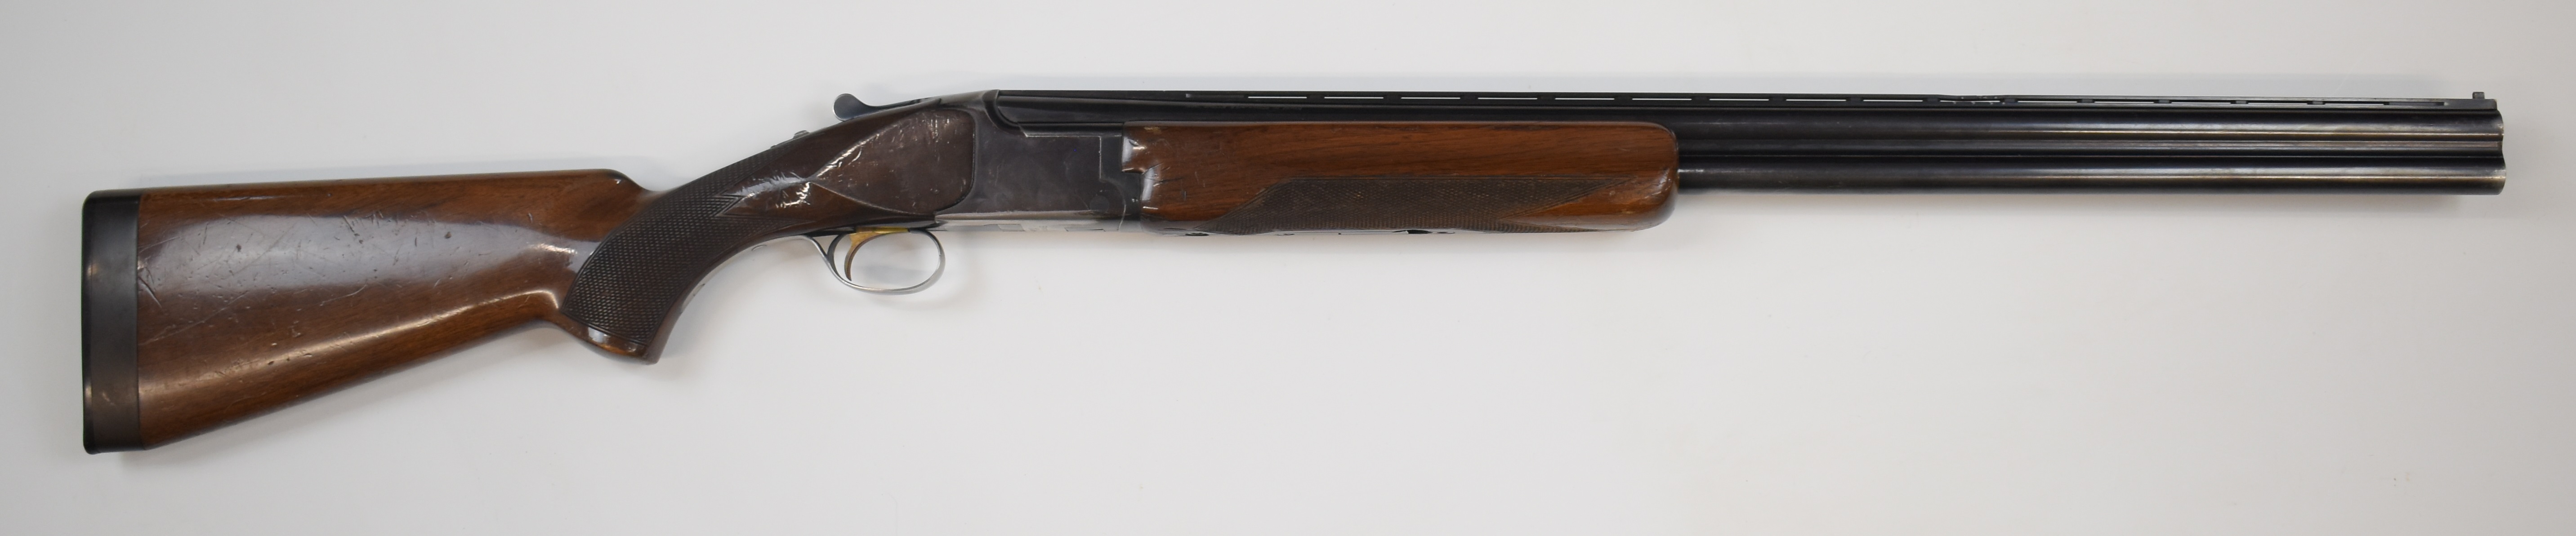 Browning Citori 12 bore over and under ejector shotgun with named underside, chequered semi-pistol - Image 2 of 10